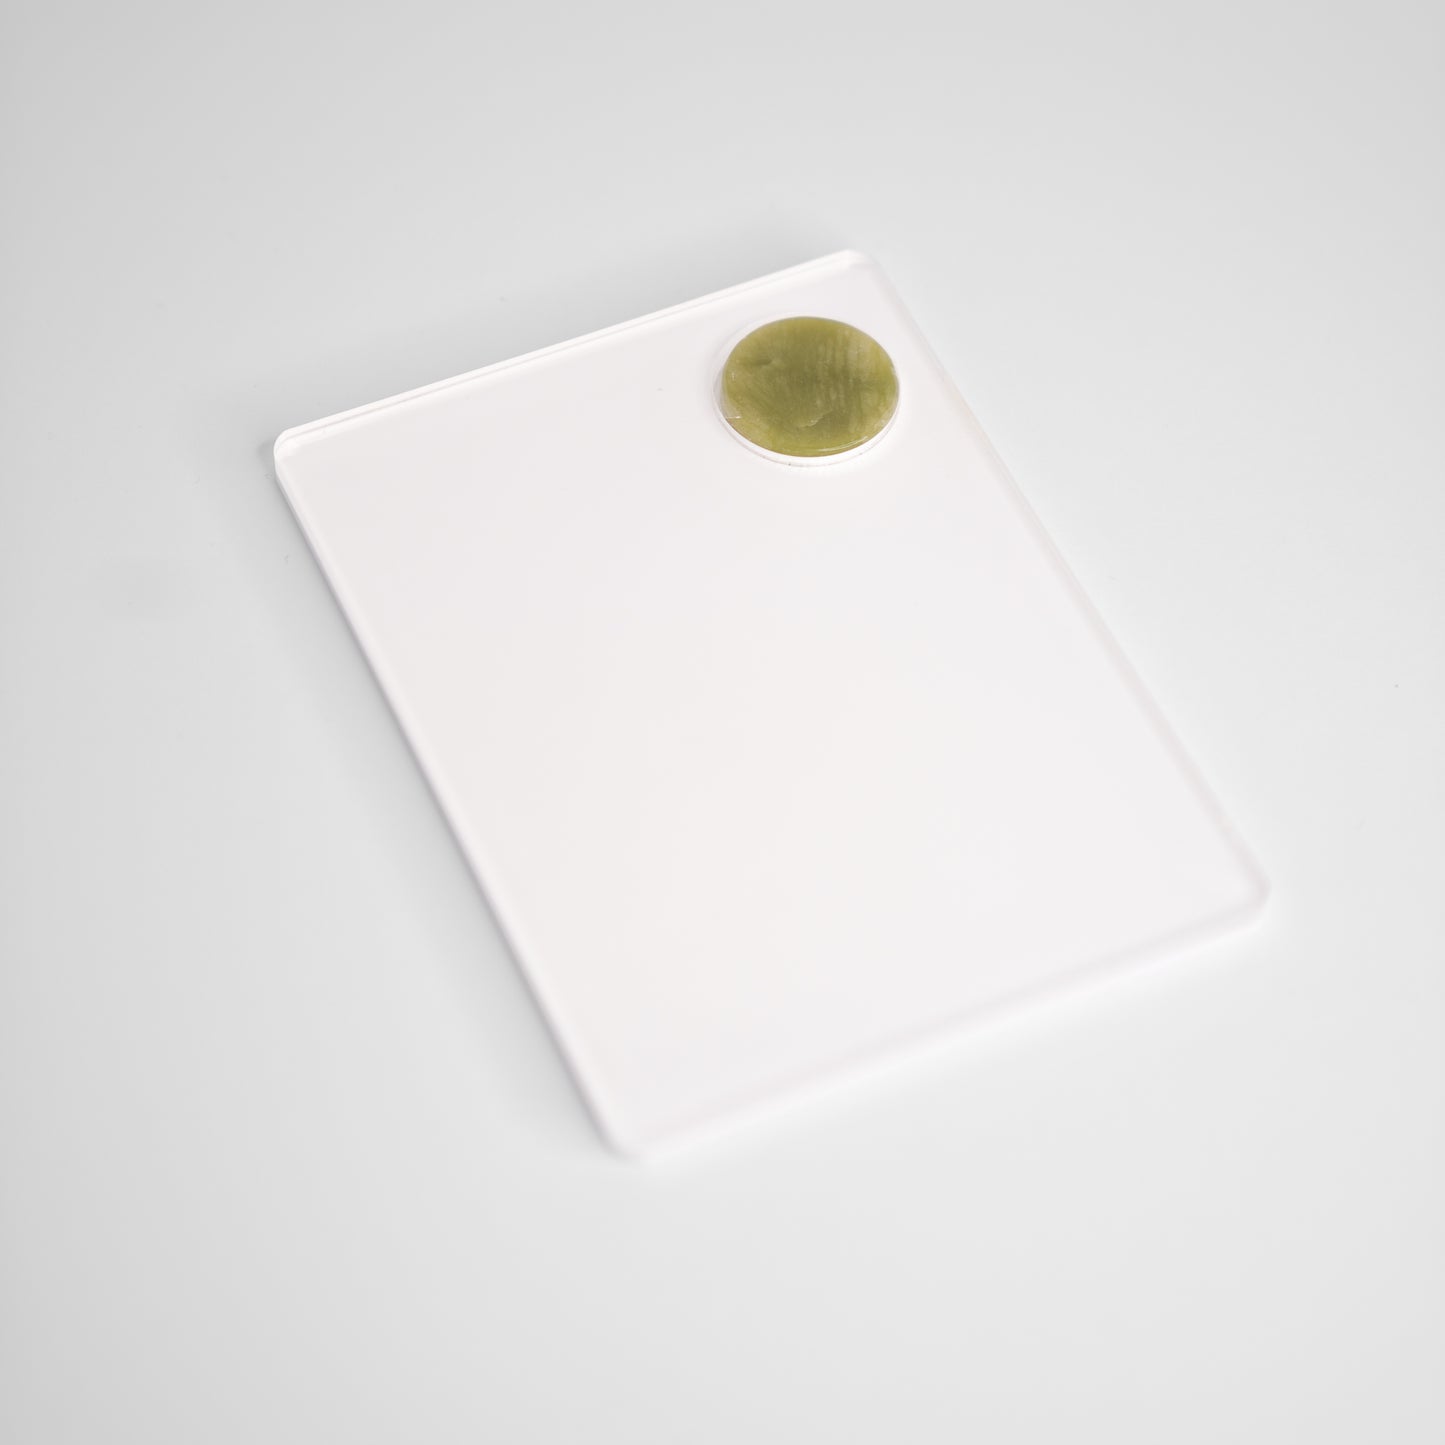 Lash Tile with removable Jade Stone